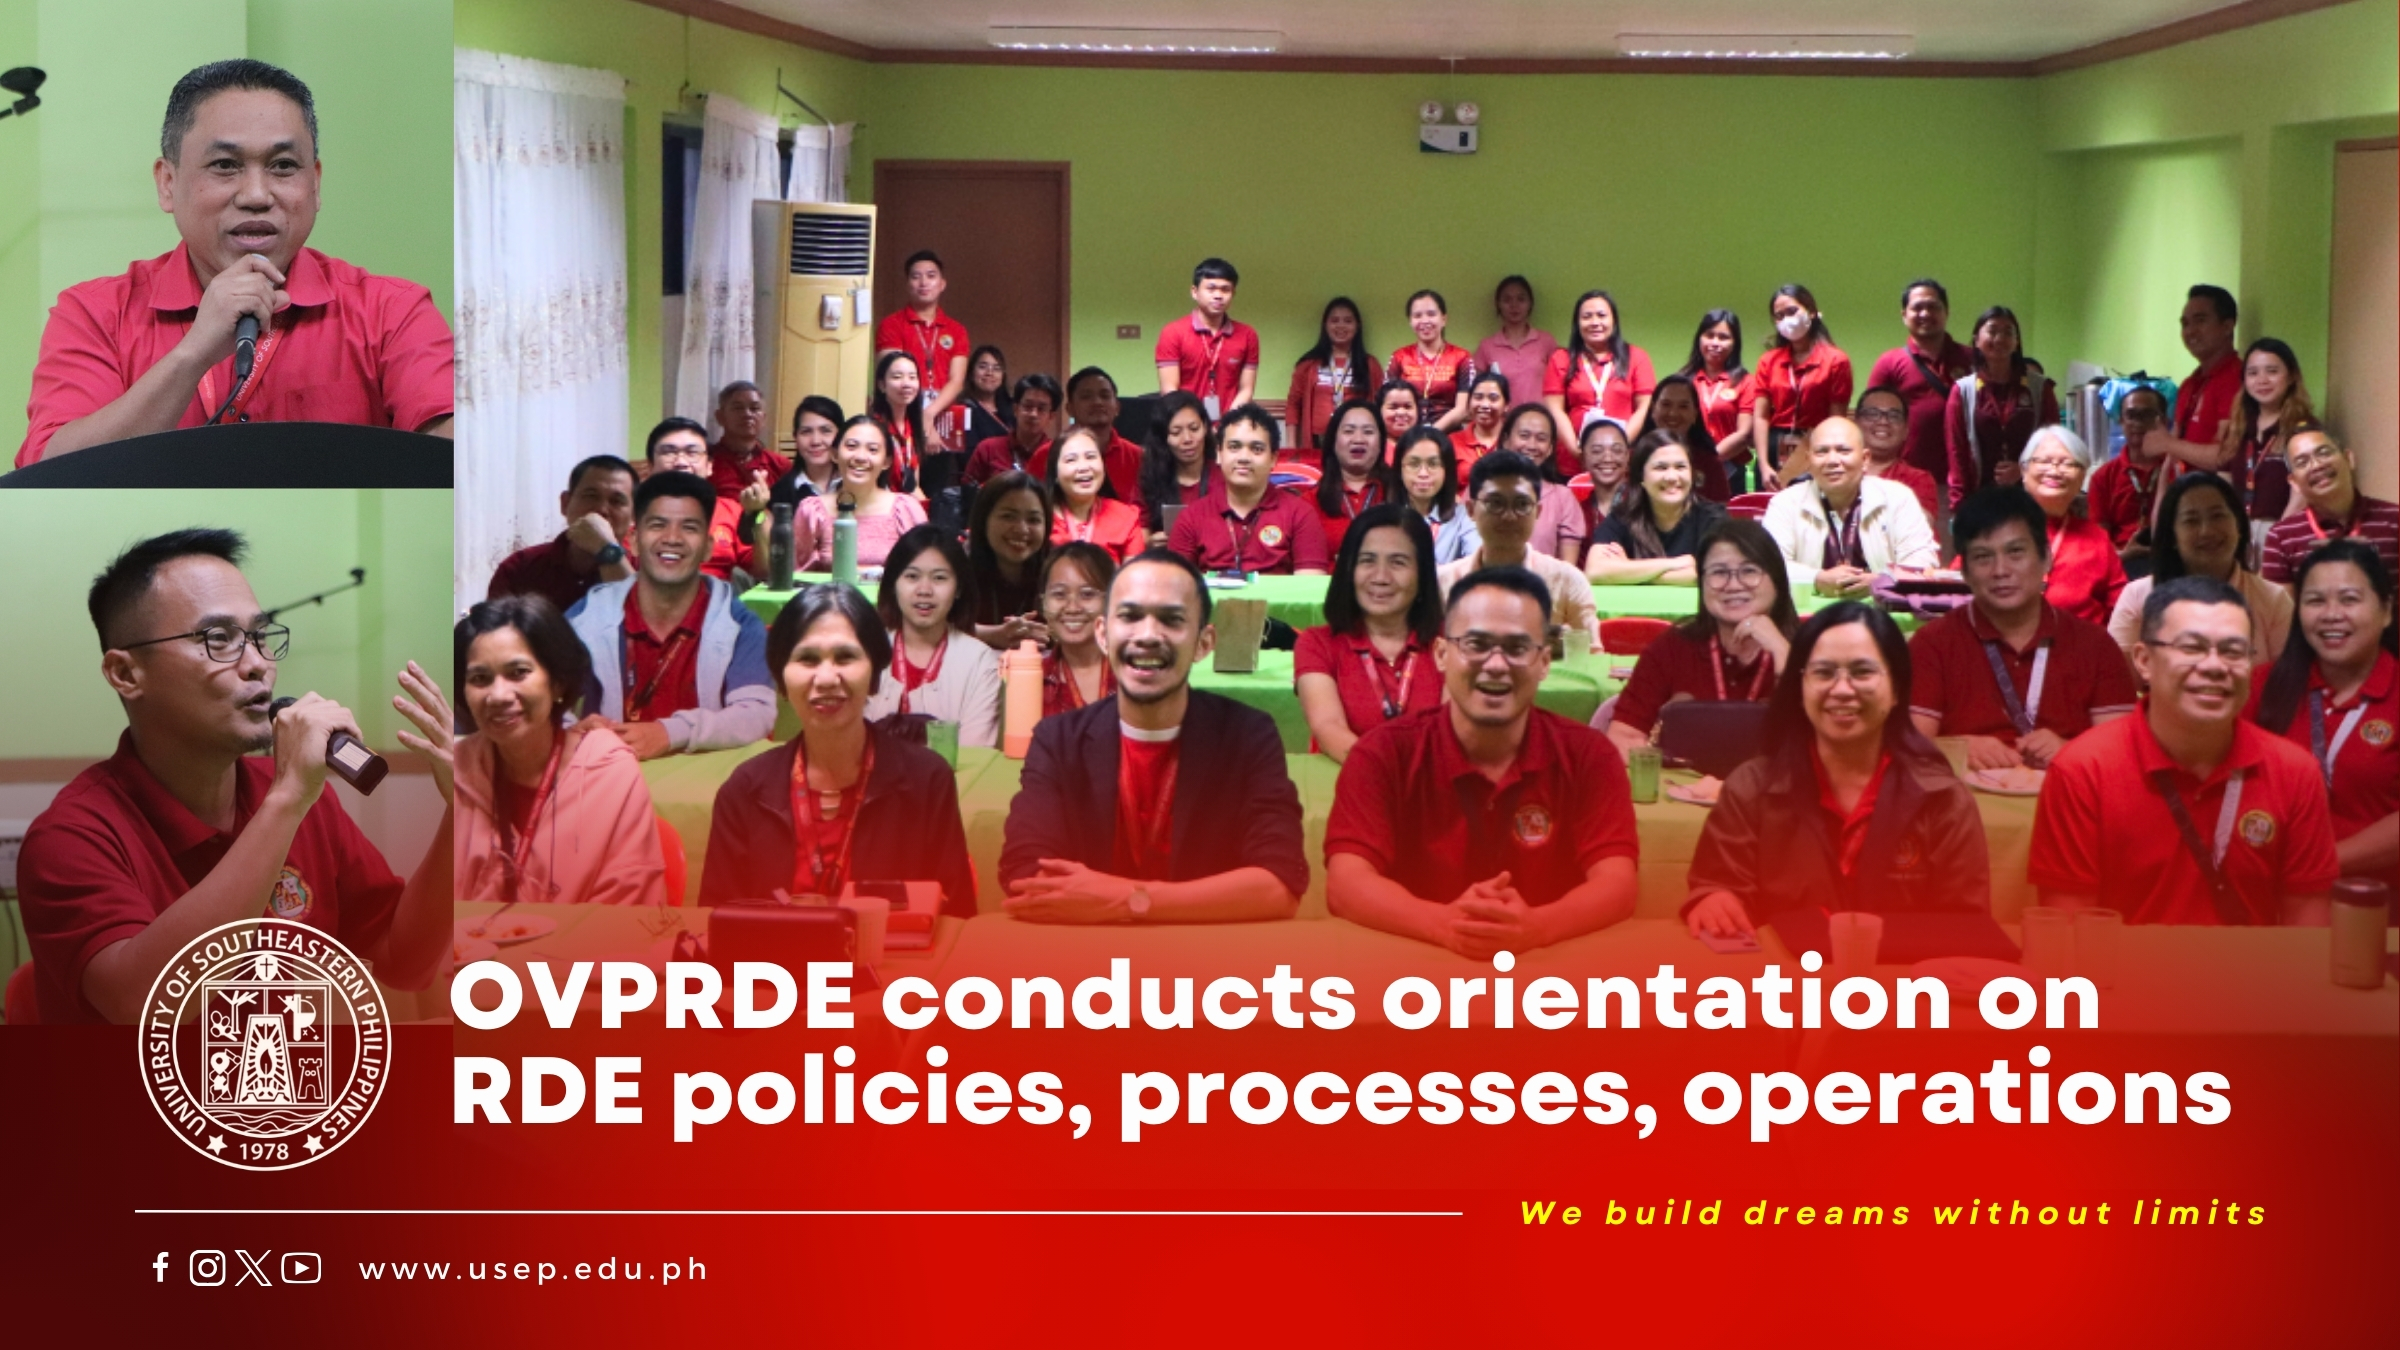 OVPRDE conducts orientation on RDE policies, processes, operations